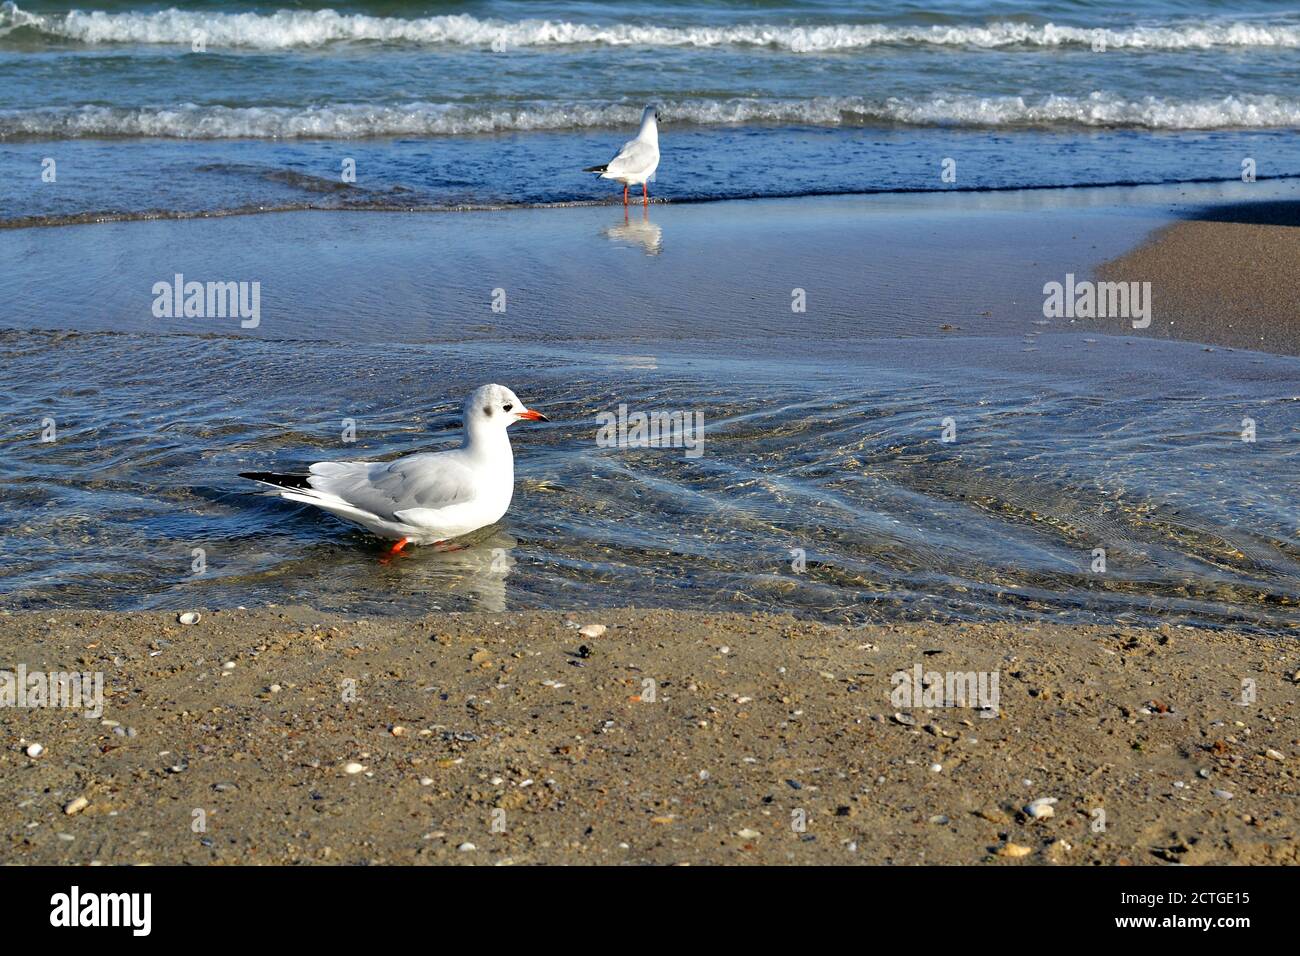 Sand on the sea. Ocean shore with seagulls Stock Photo